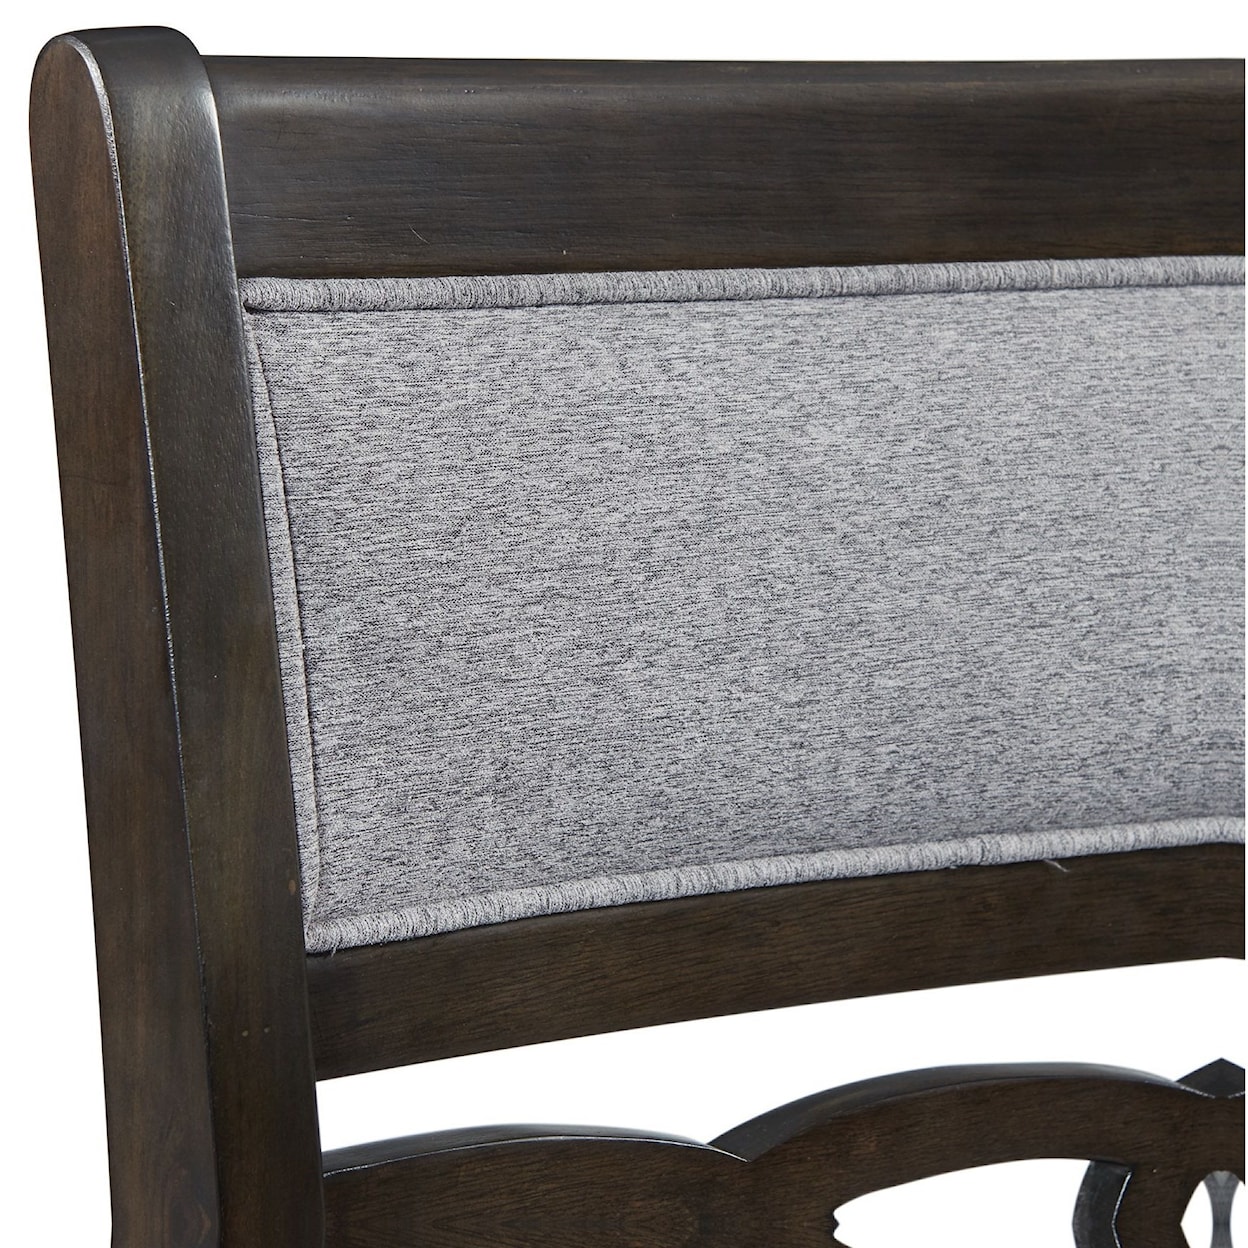 Elements International Amherst Counter Height Side Chair